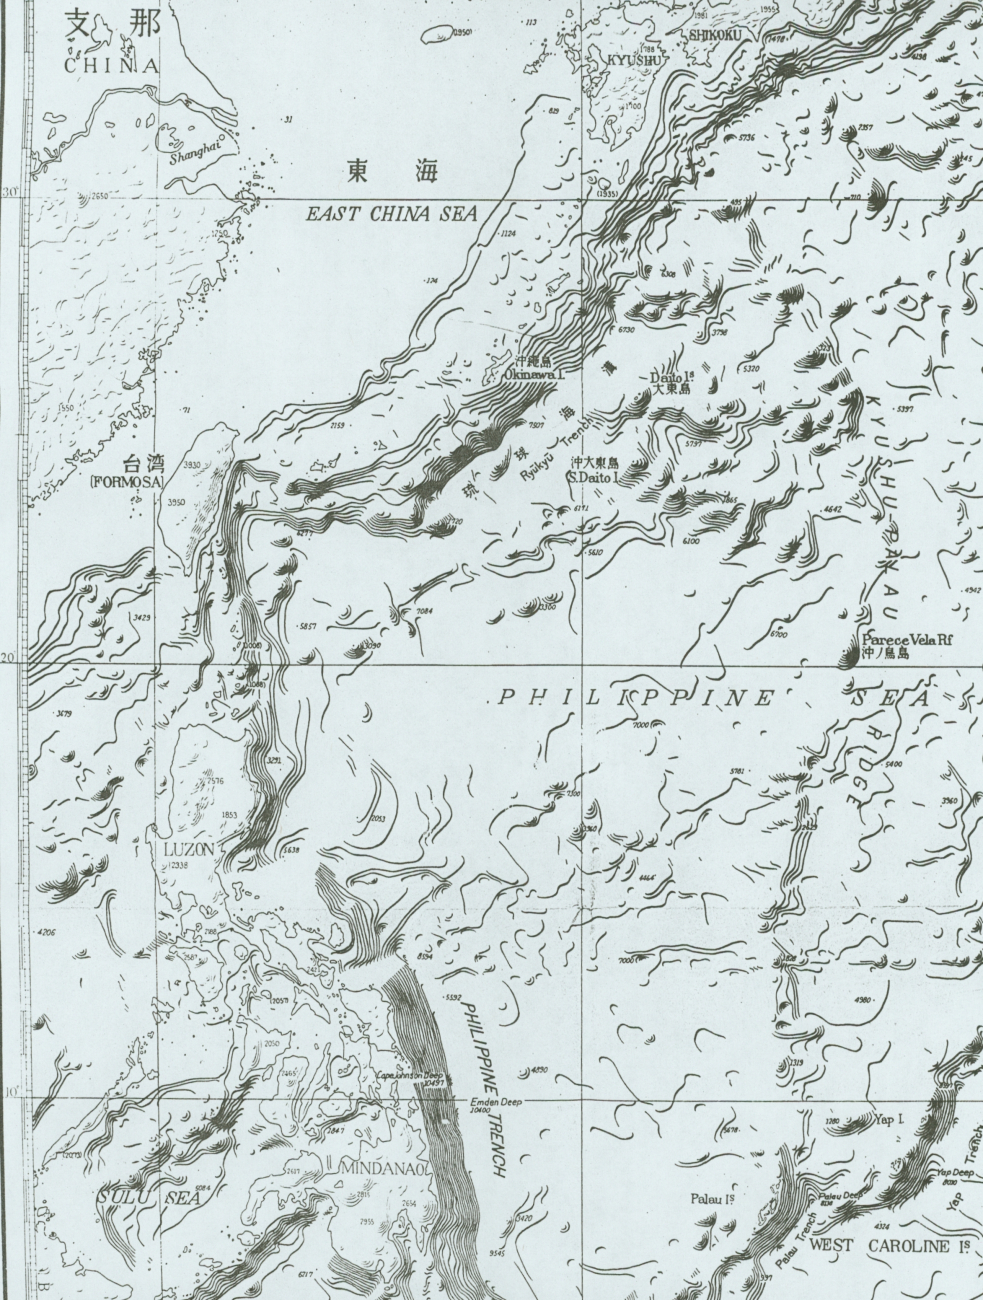 Section of Bathymetric Chart of the Northwest Pacific showingarea aound Philippine Sea